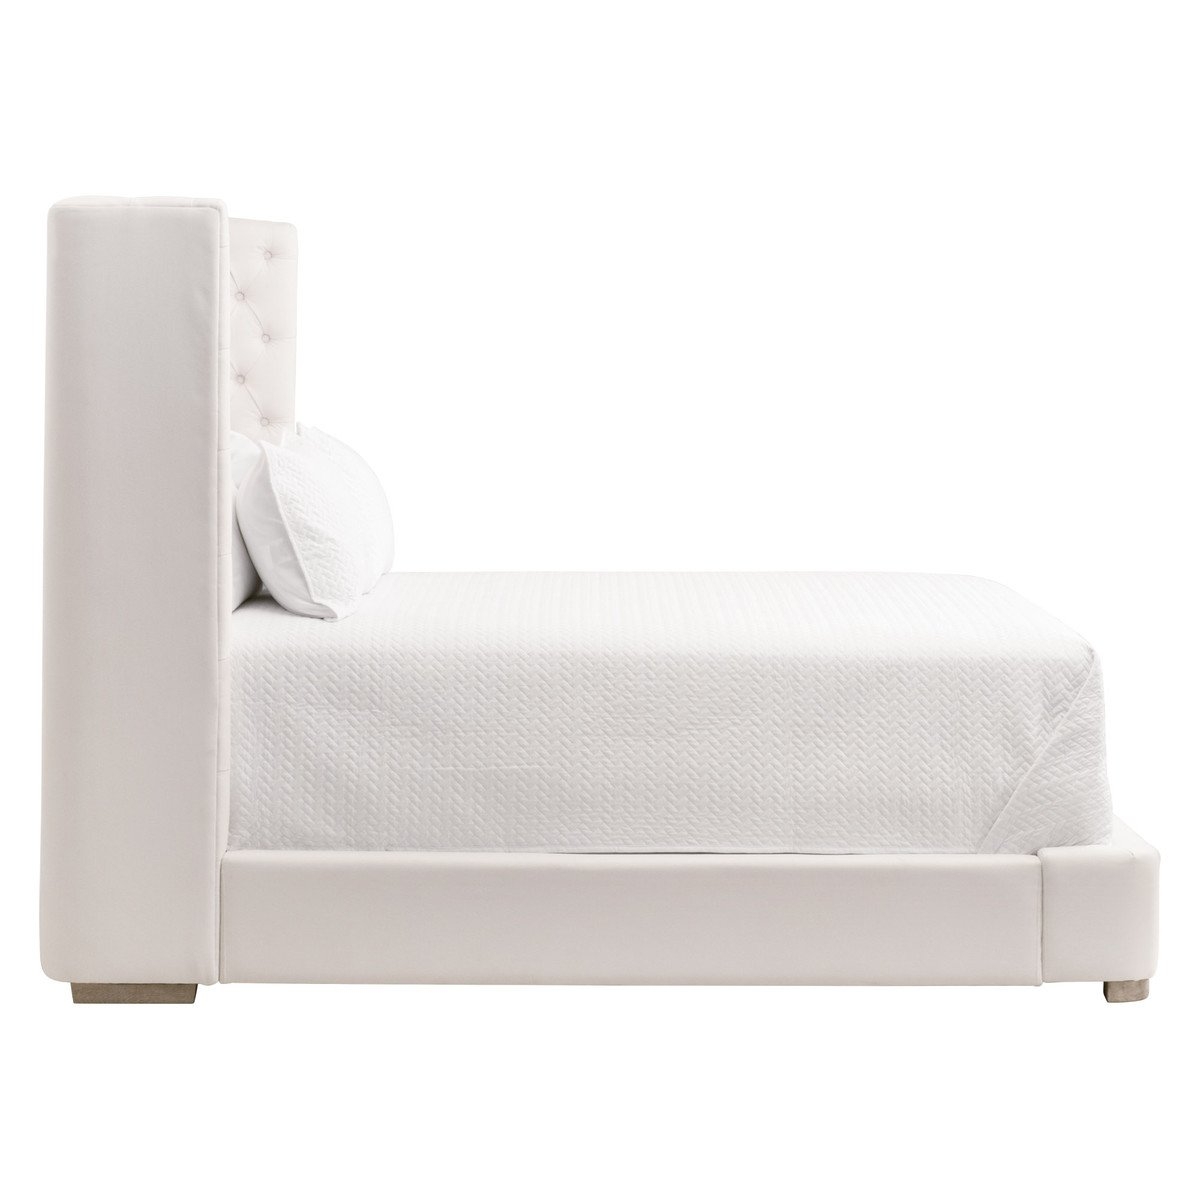 Barclay Standard King Bed - Image 2